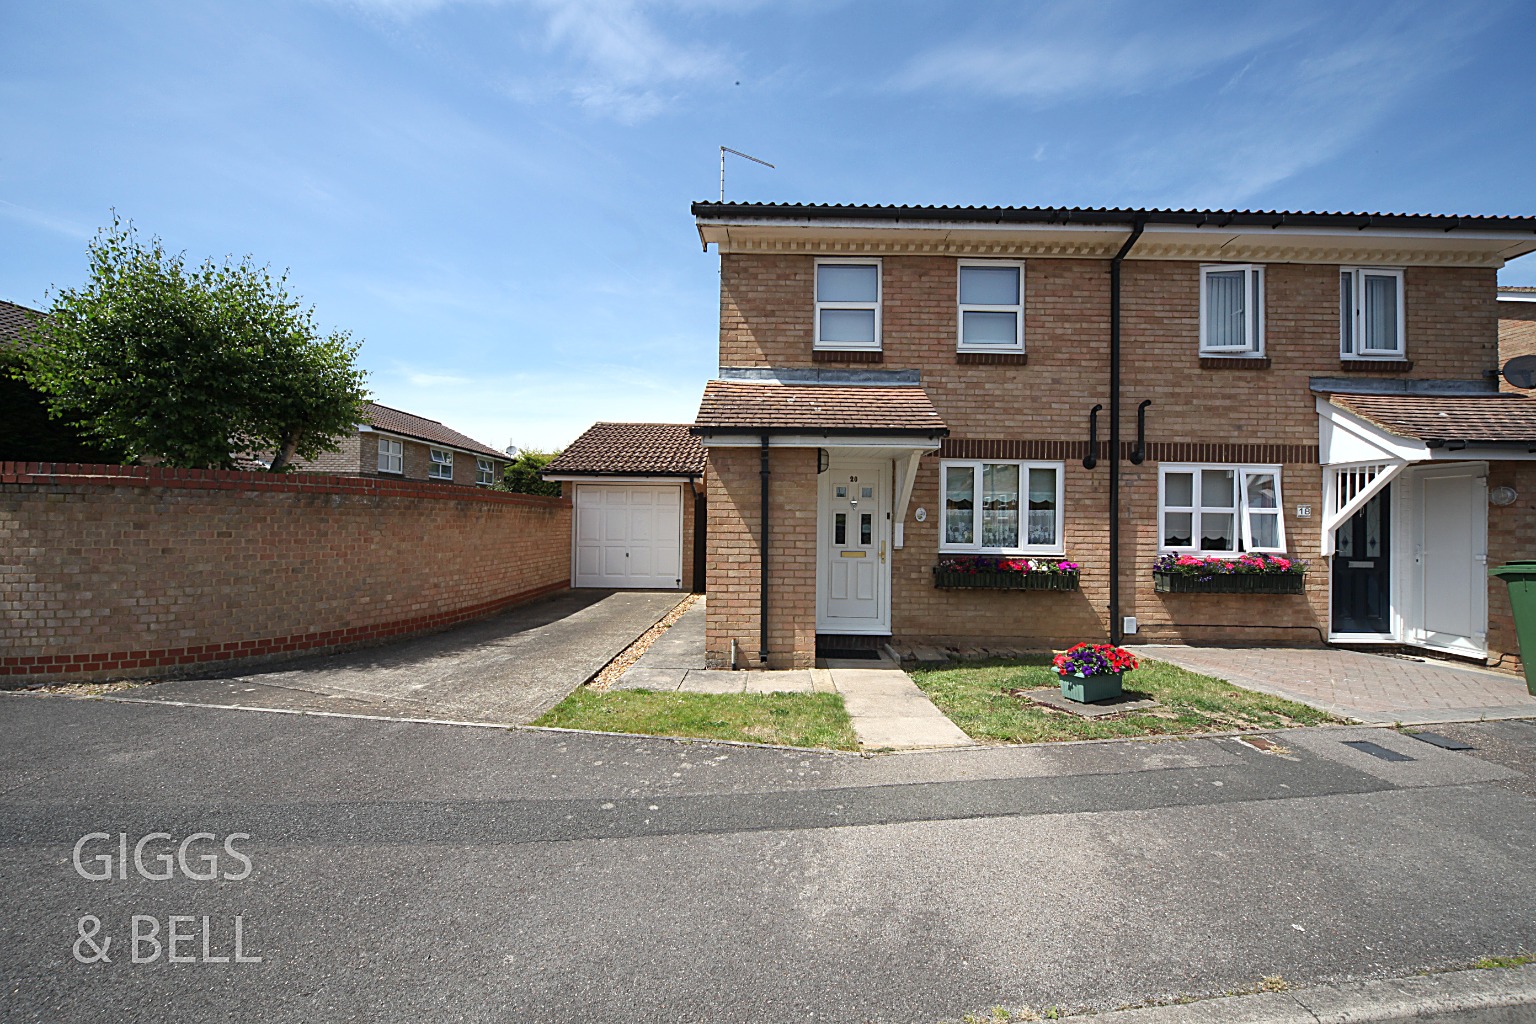 2 bed semi-detached house for sale in Rushall Green, Luton - Property Image 1